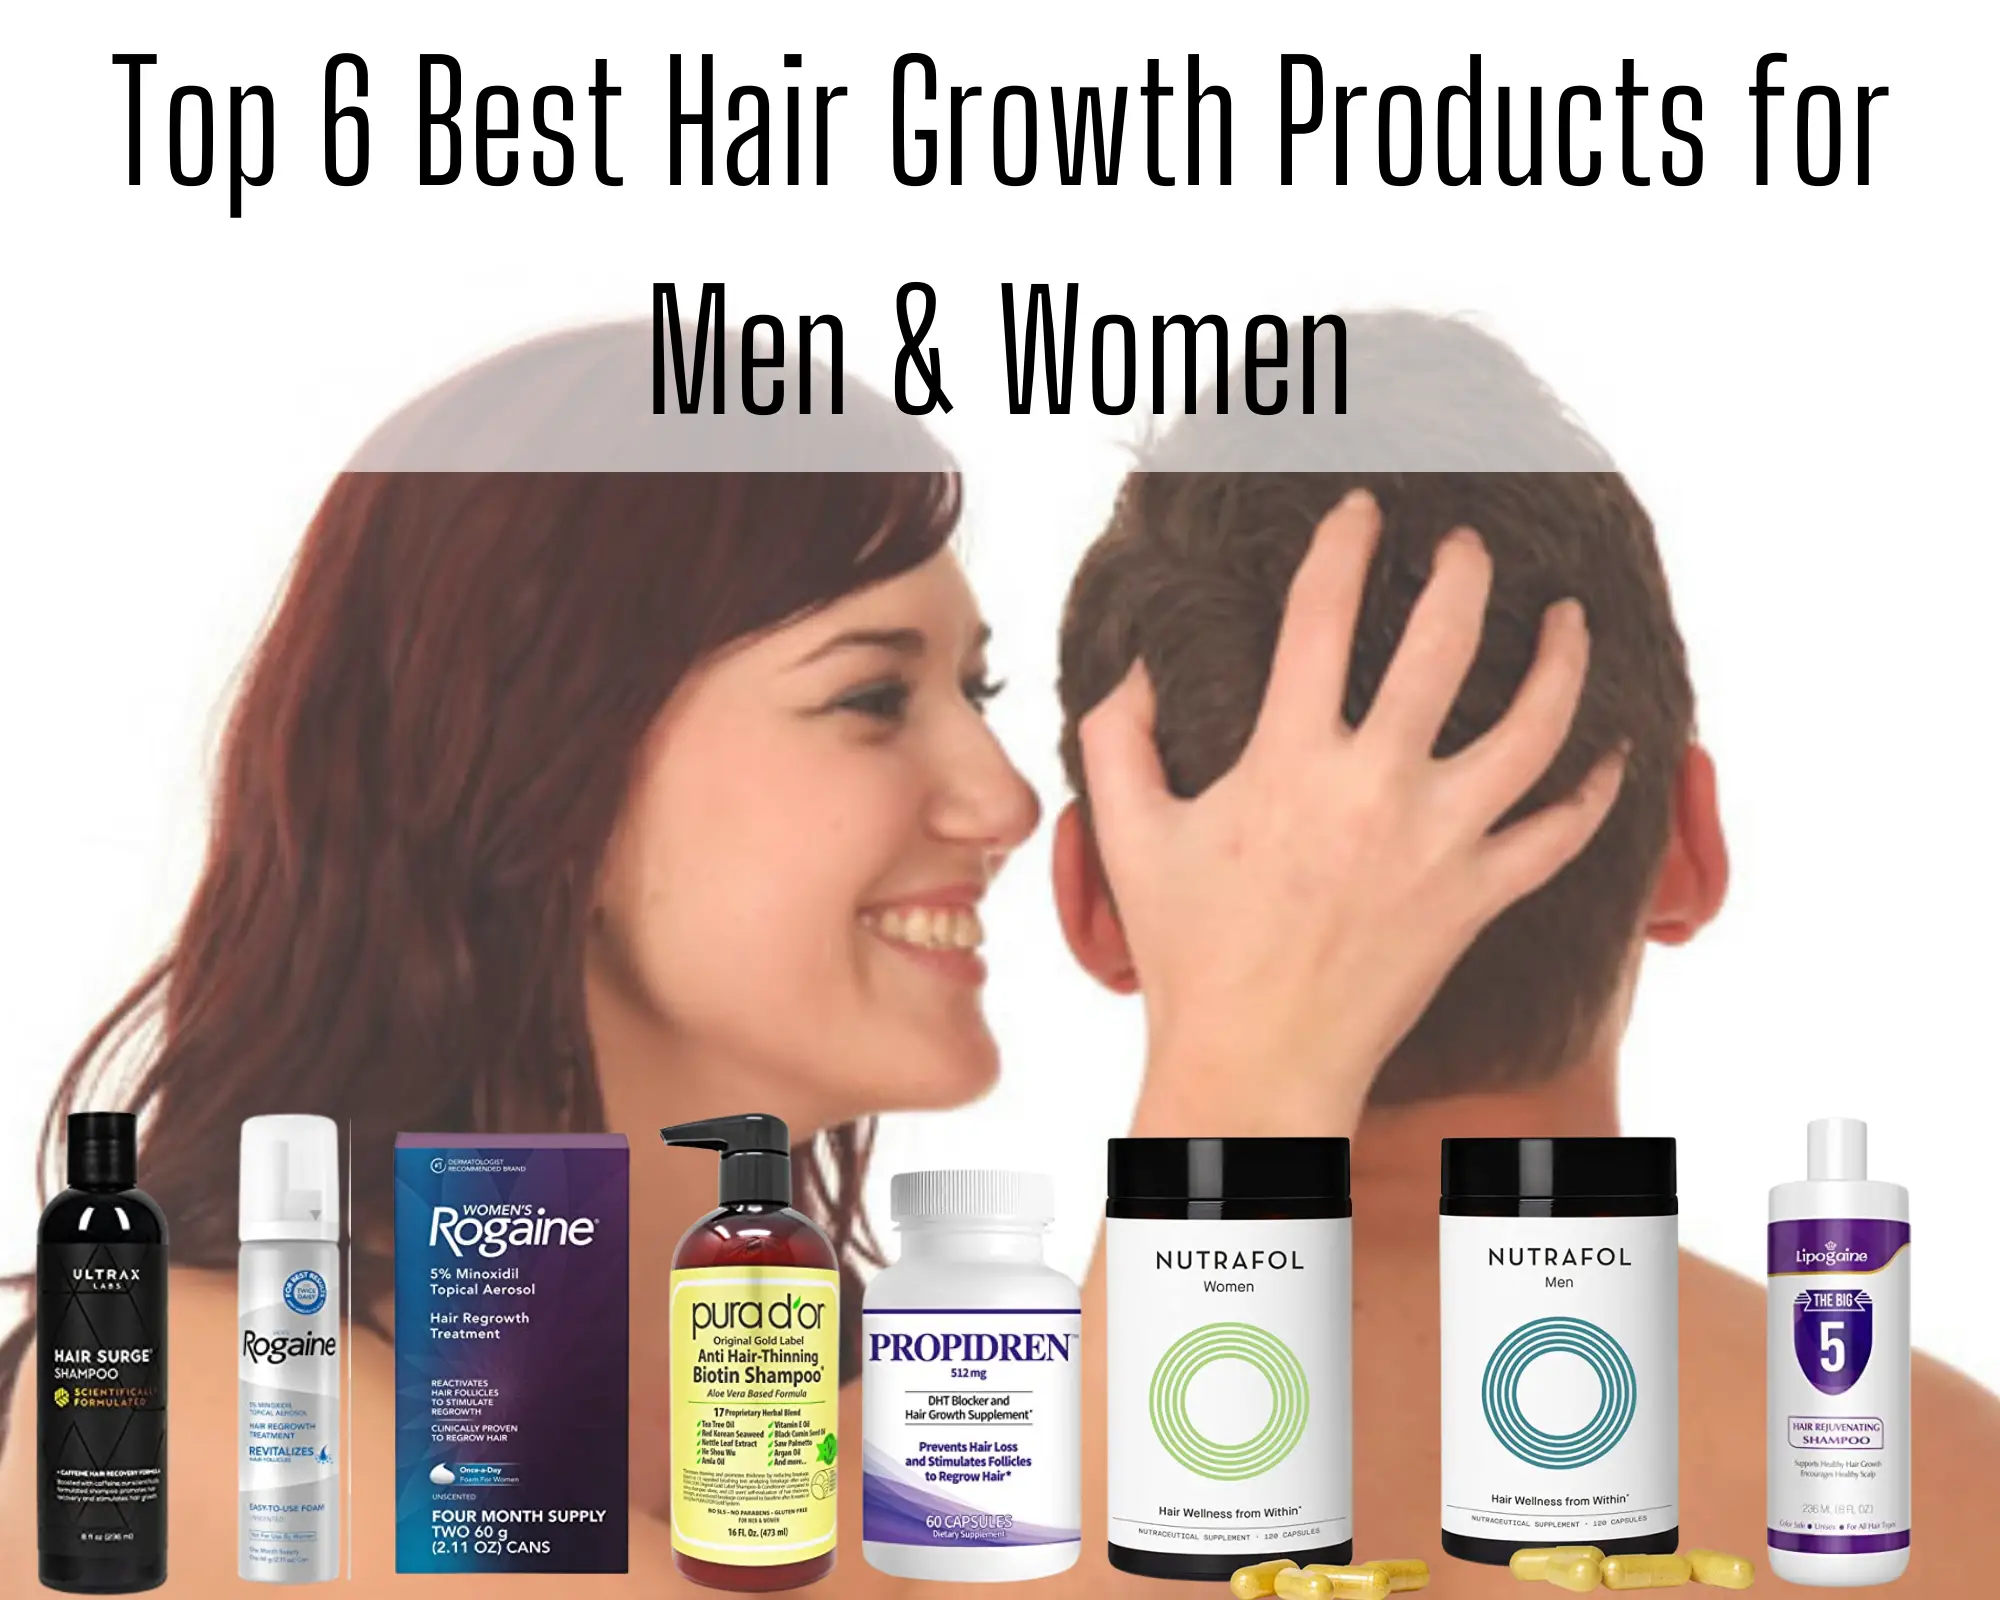 Best Hair Growth Products for Men & Women